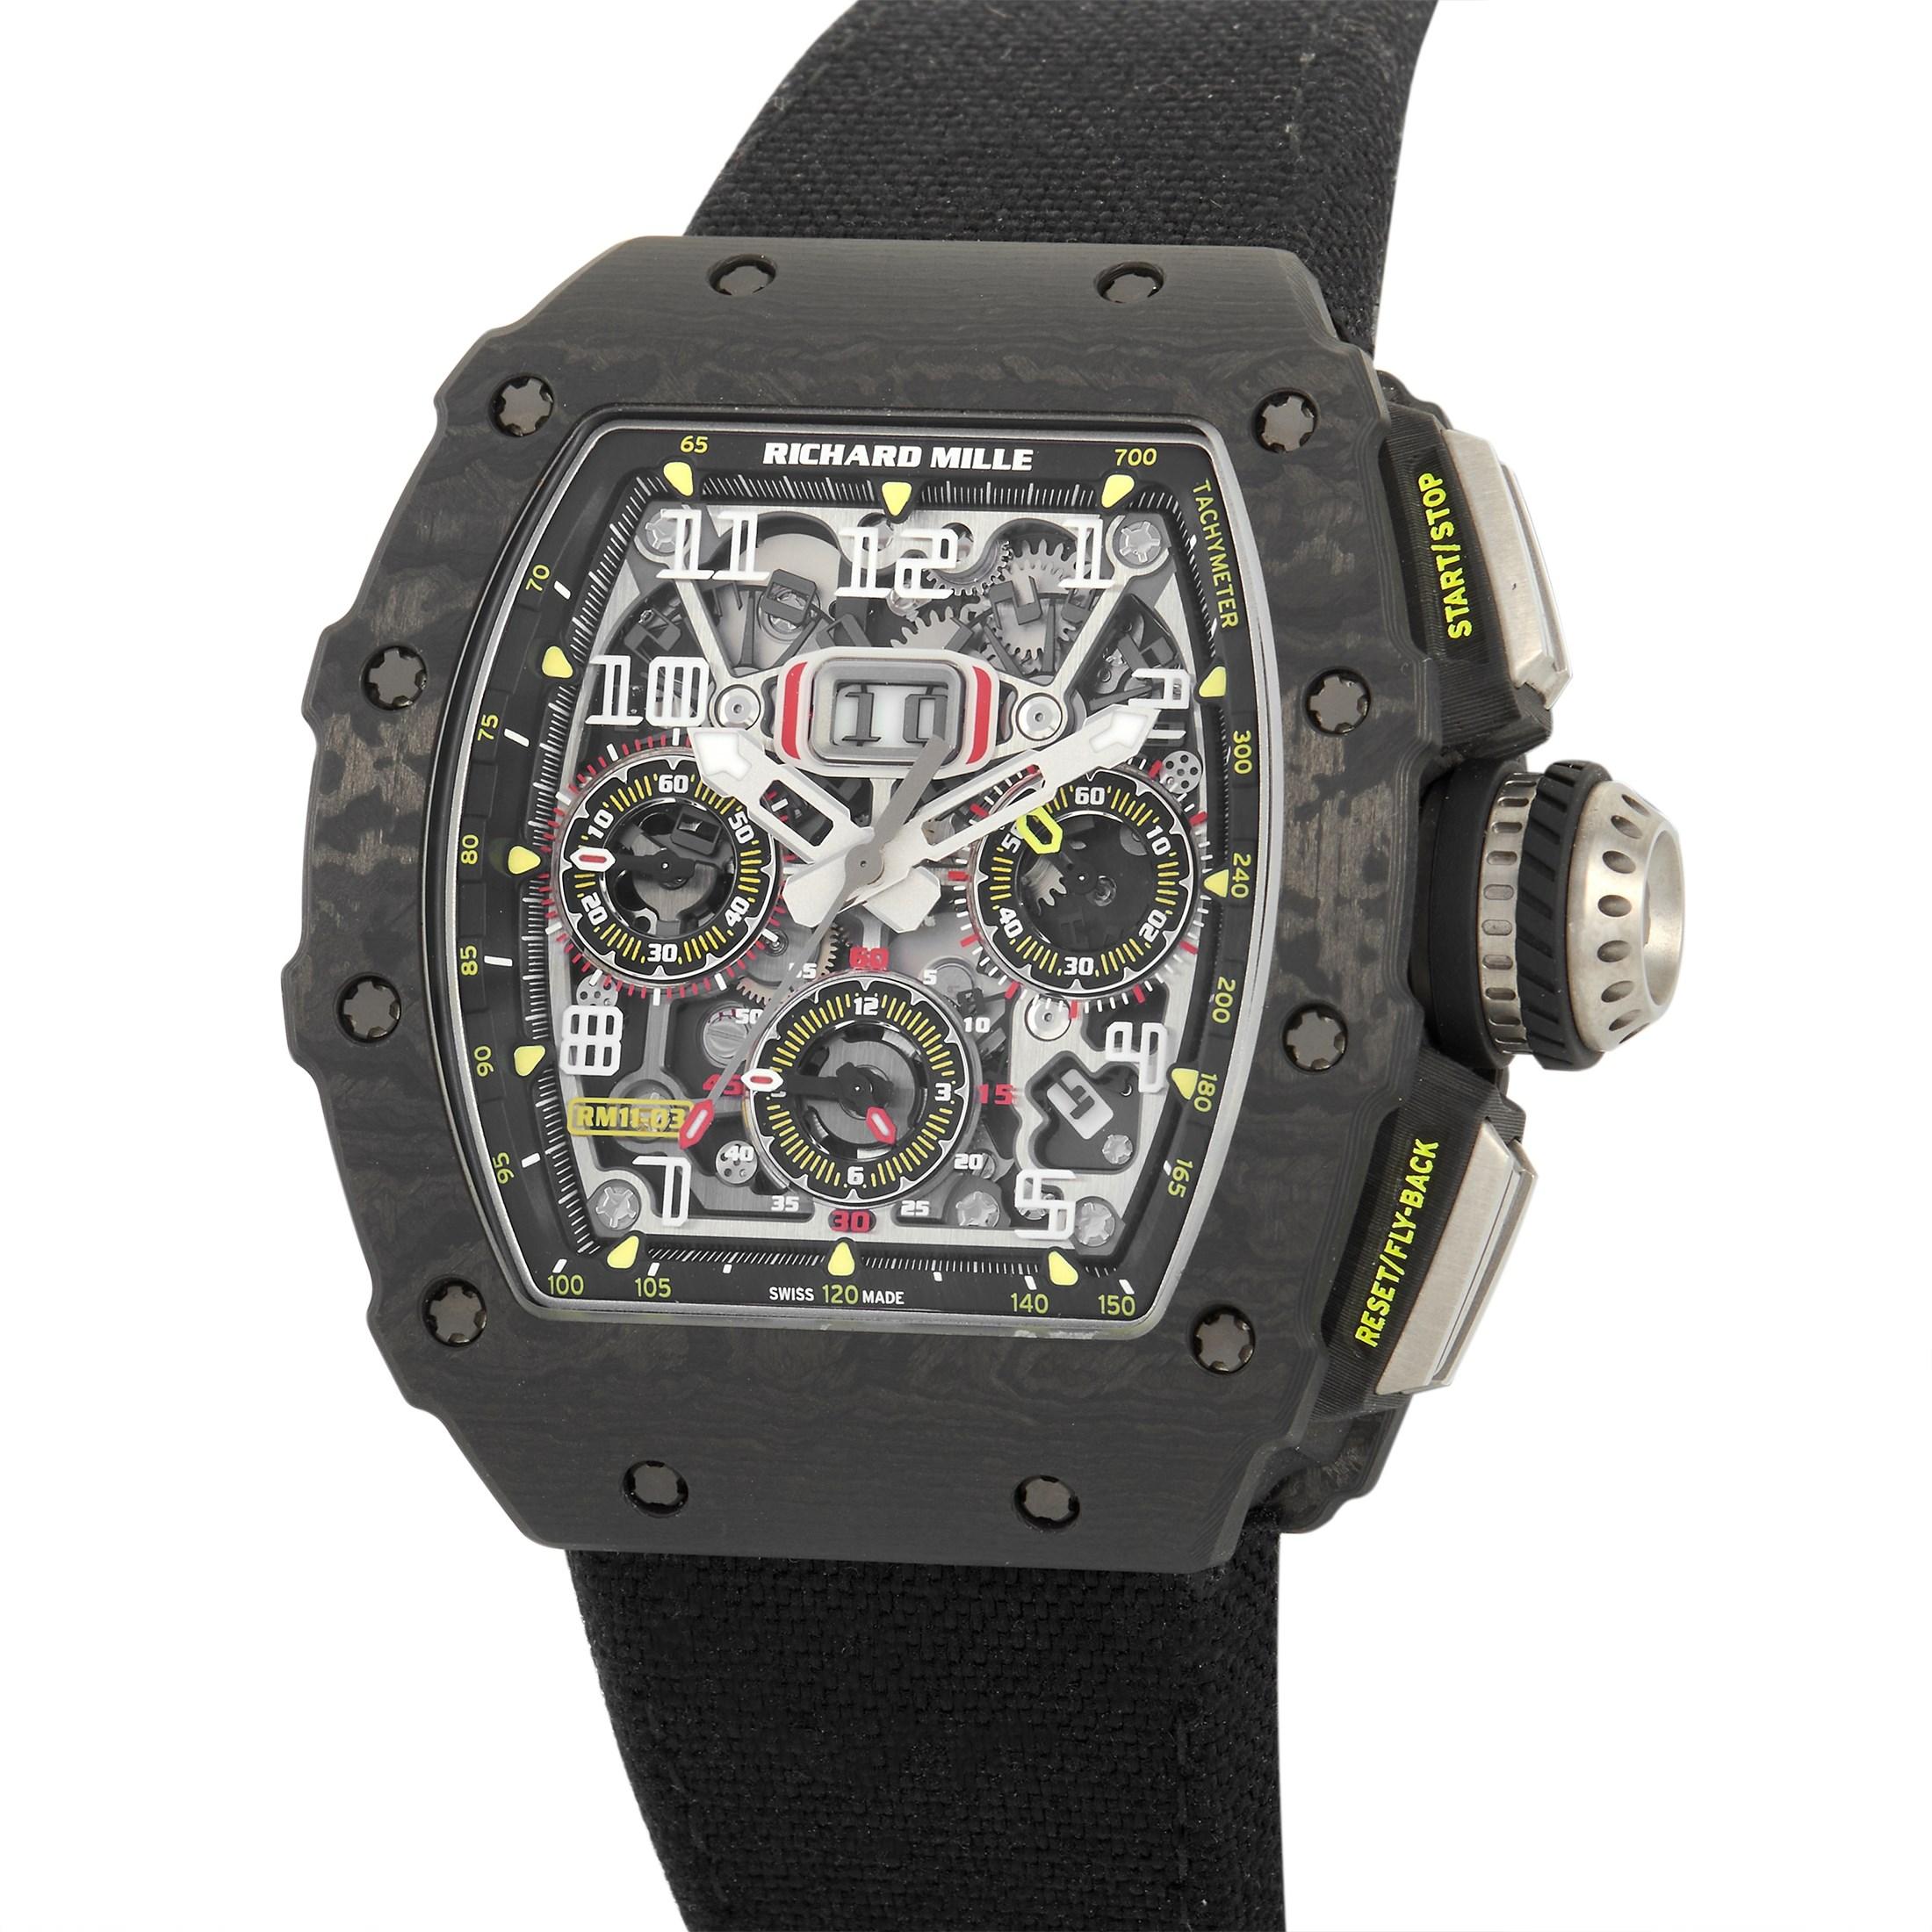 This Richard Mille watch, reference number RM11-03, is an iconic collaboration with McLaren Automotive. 

Rugged and durable, it pairs a 45mm carbon case with a fabric strap. On the striking skeleton dial, you’ll find raised Arabic numerals, a trio